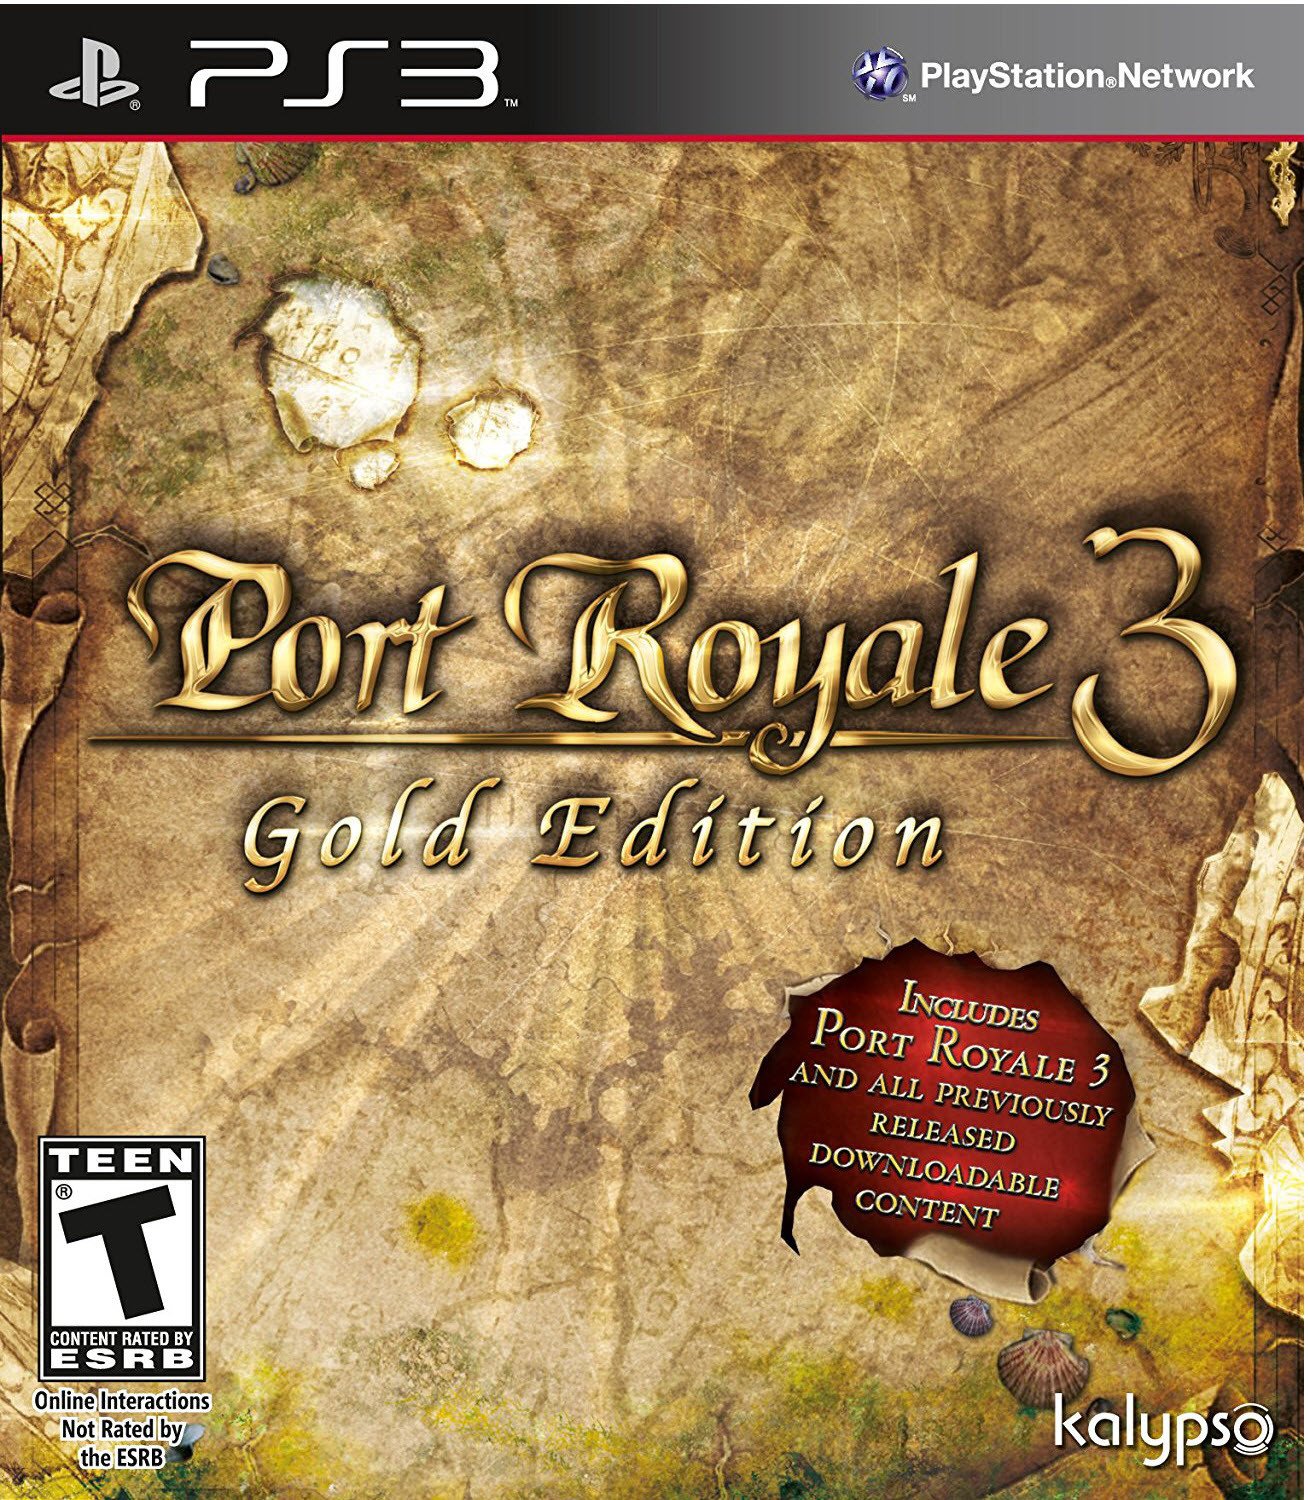 Port Royale 3: Gold Edition - PlayStation 3